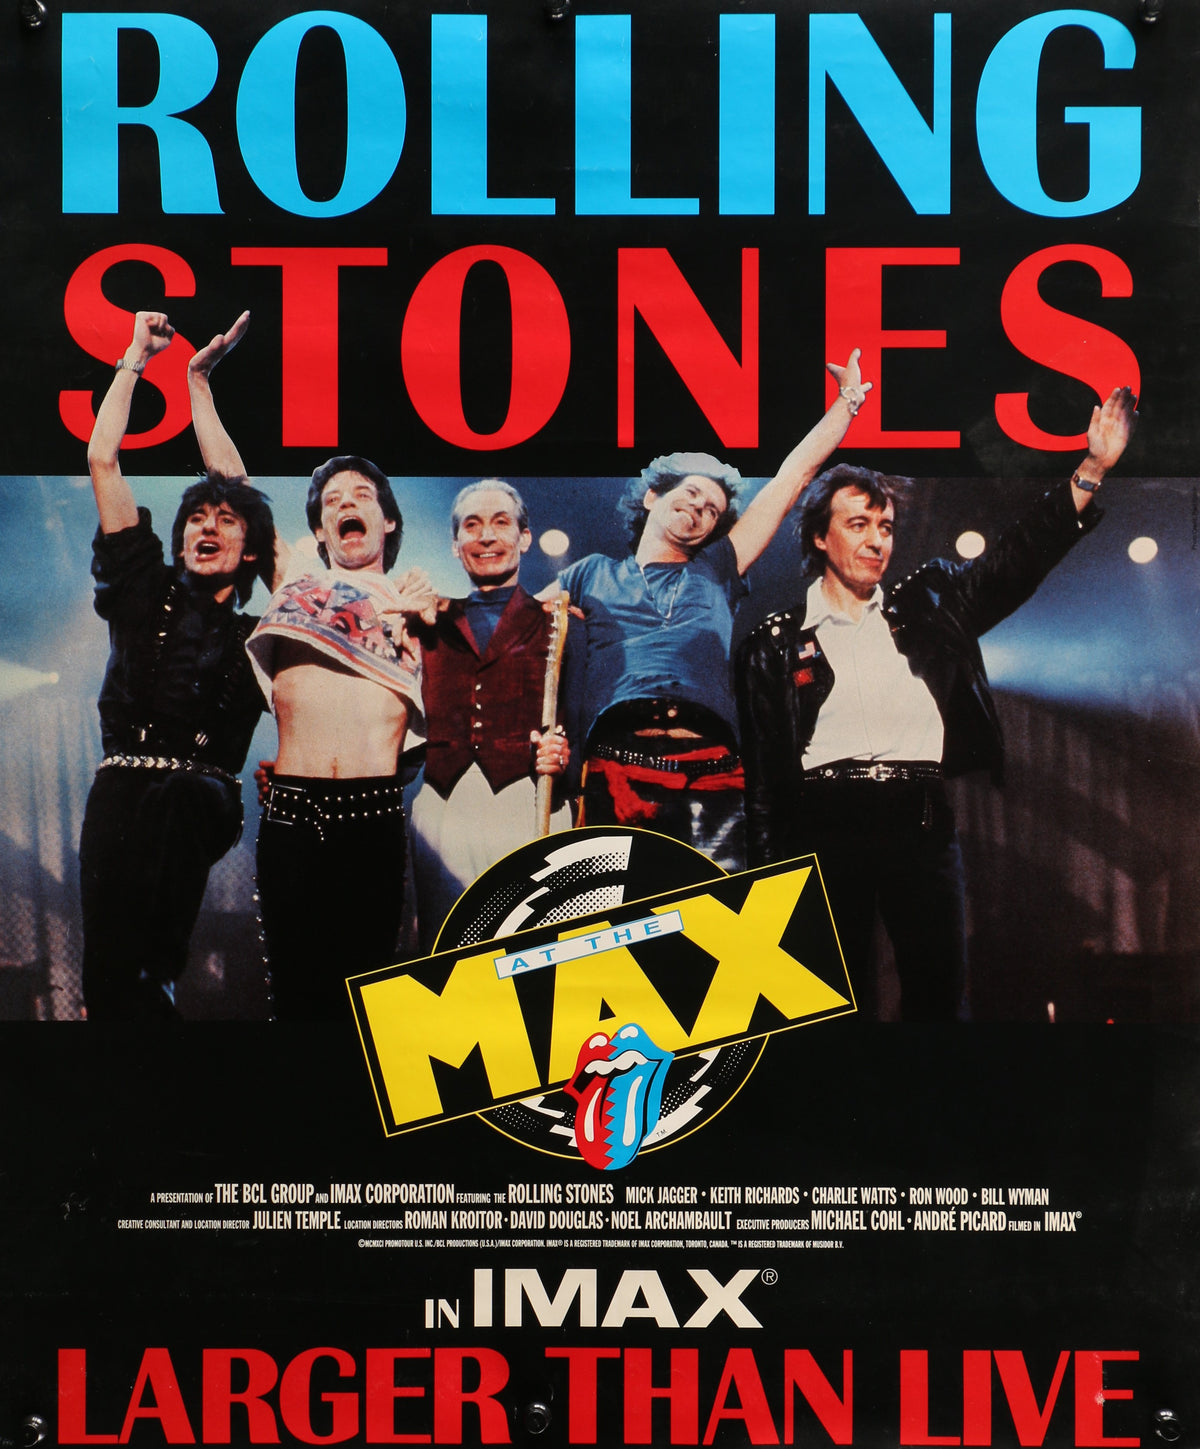 Rolling Stones- IMAX Larger than Live - Authentic Vintage Poster